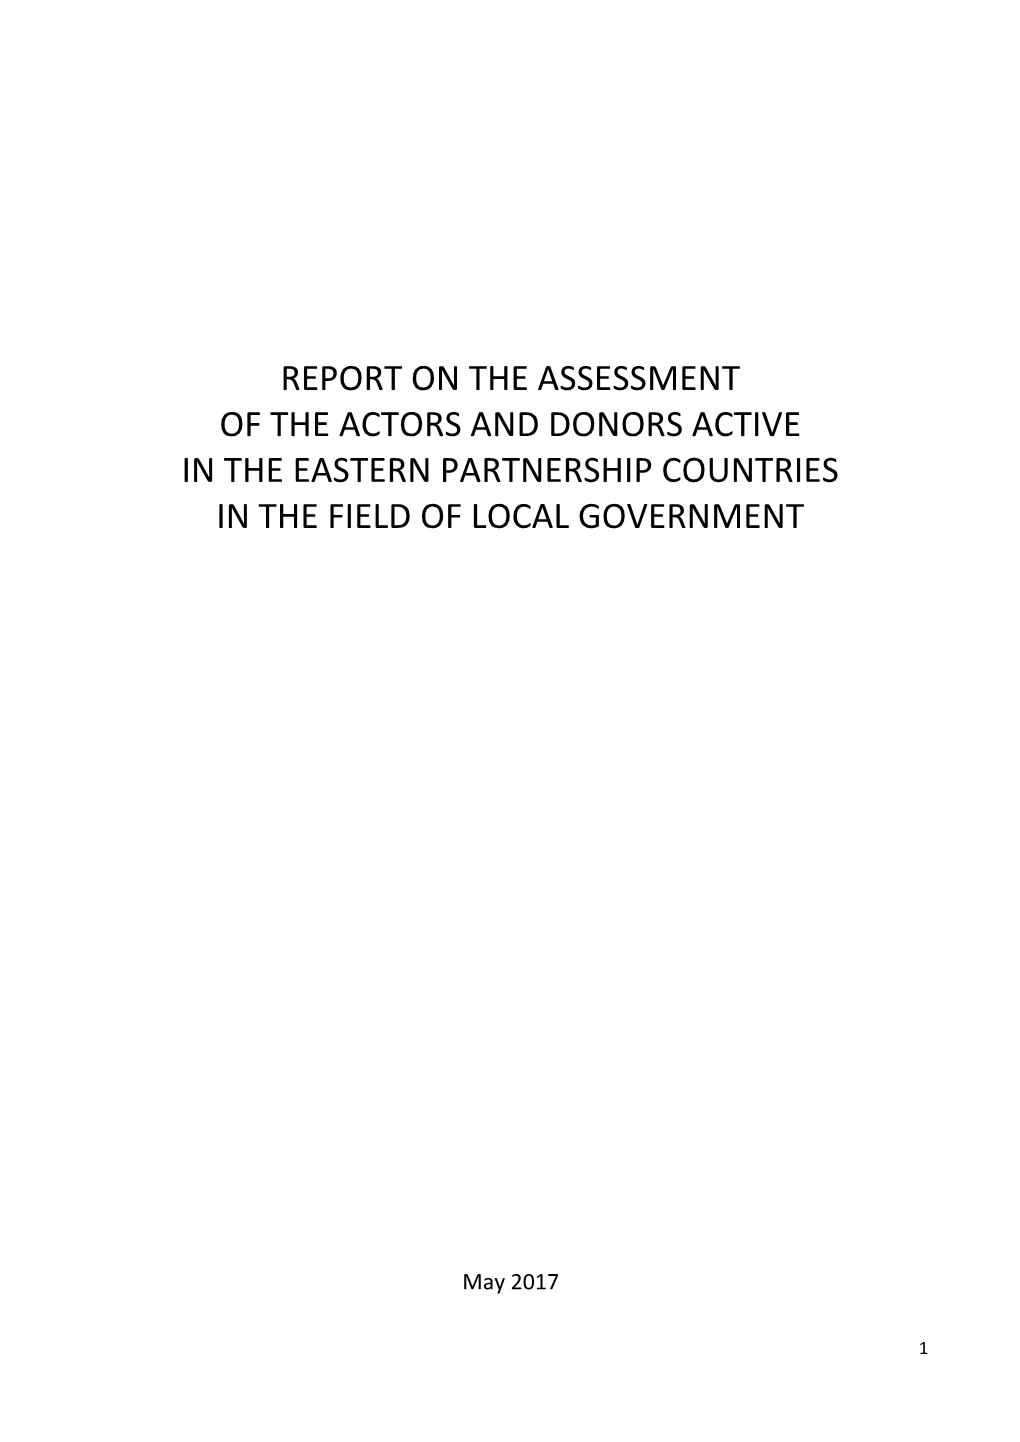 Report on the Assessment of the Actors and Donors Active in the Eastern Partnership Countries in the Field of Local Government